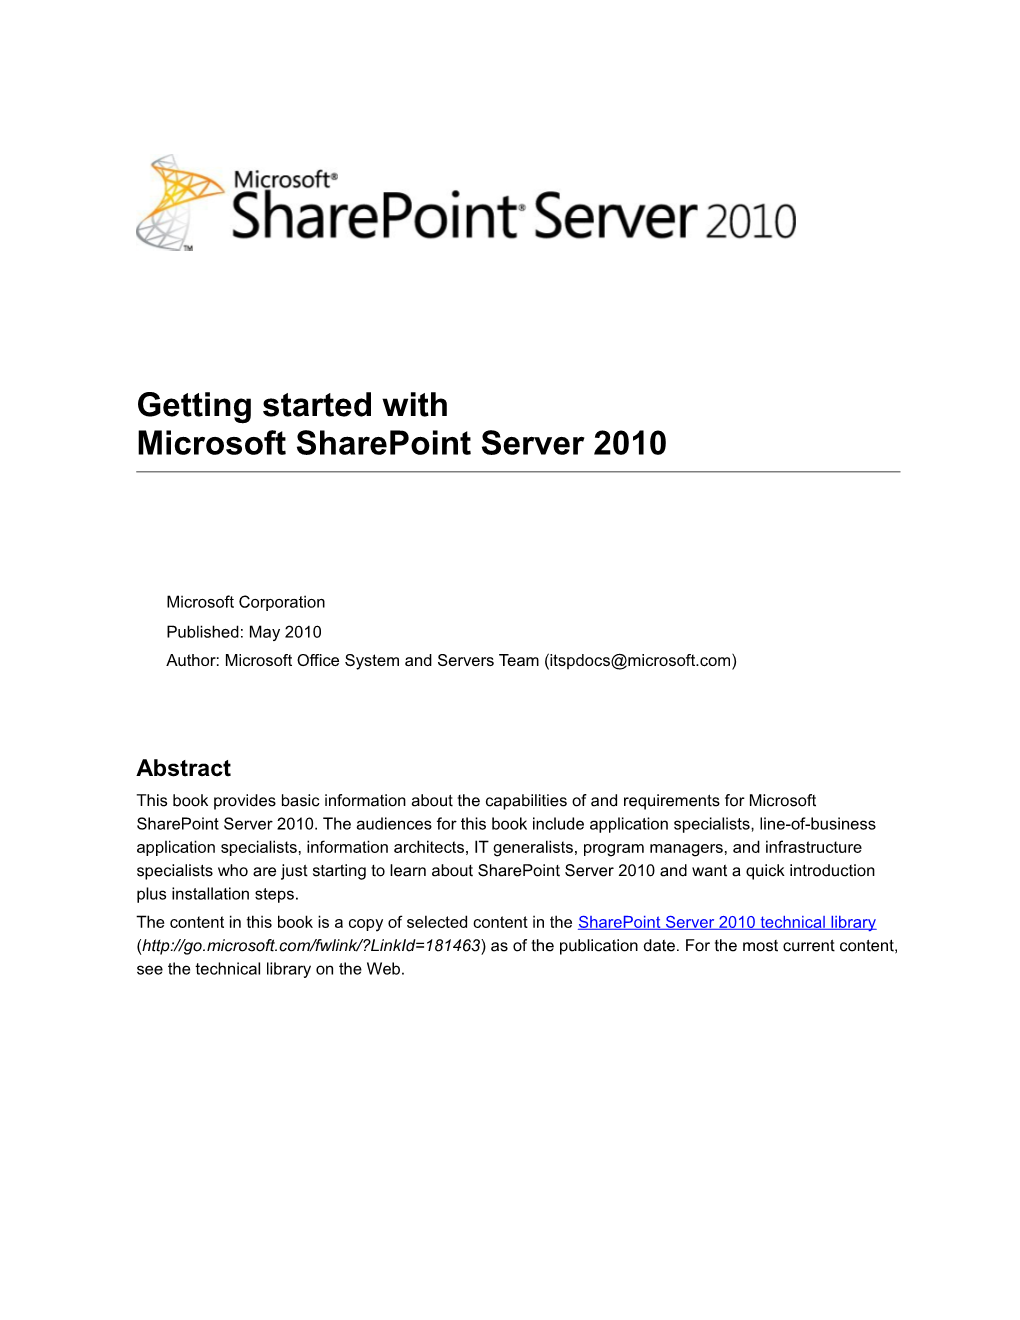 Getting Started with Microsoft Sharepoint Server 2010